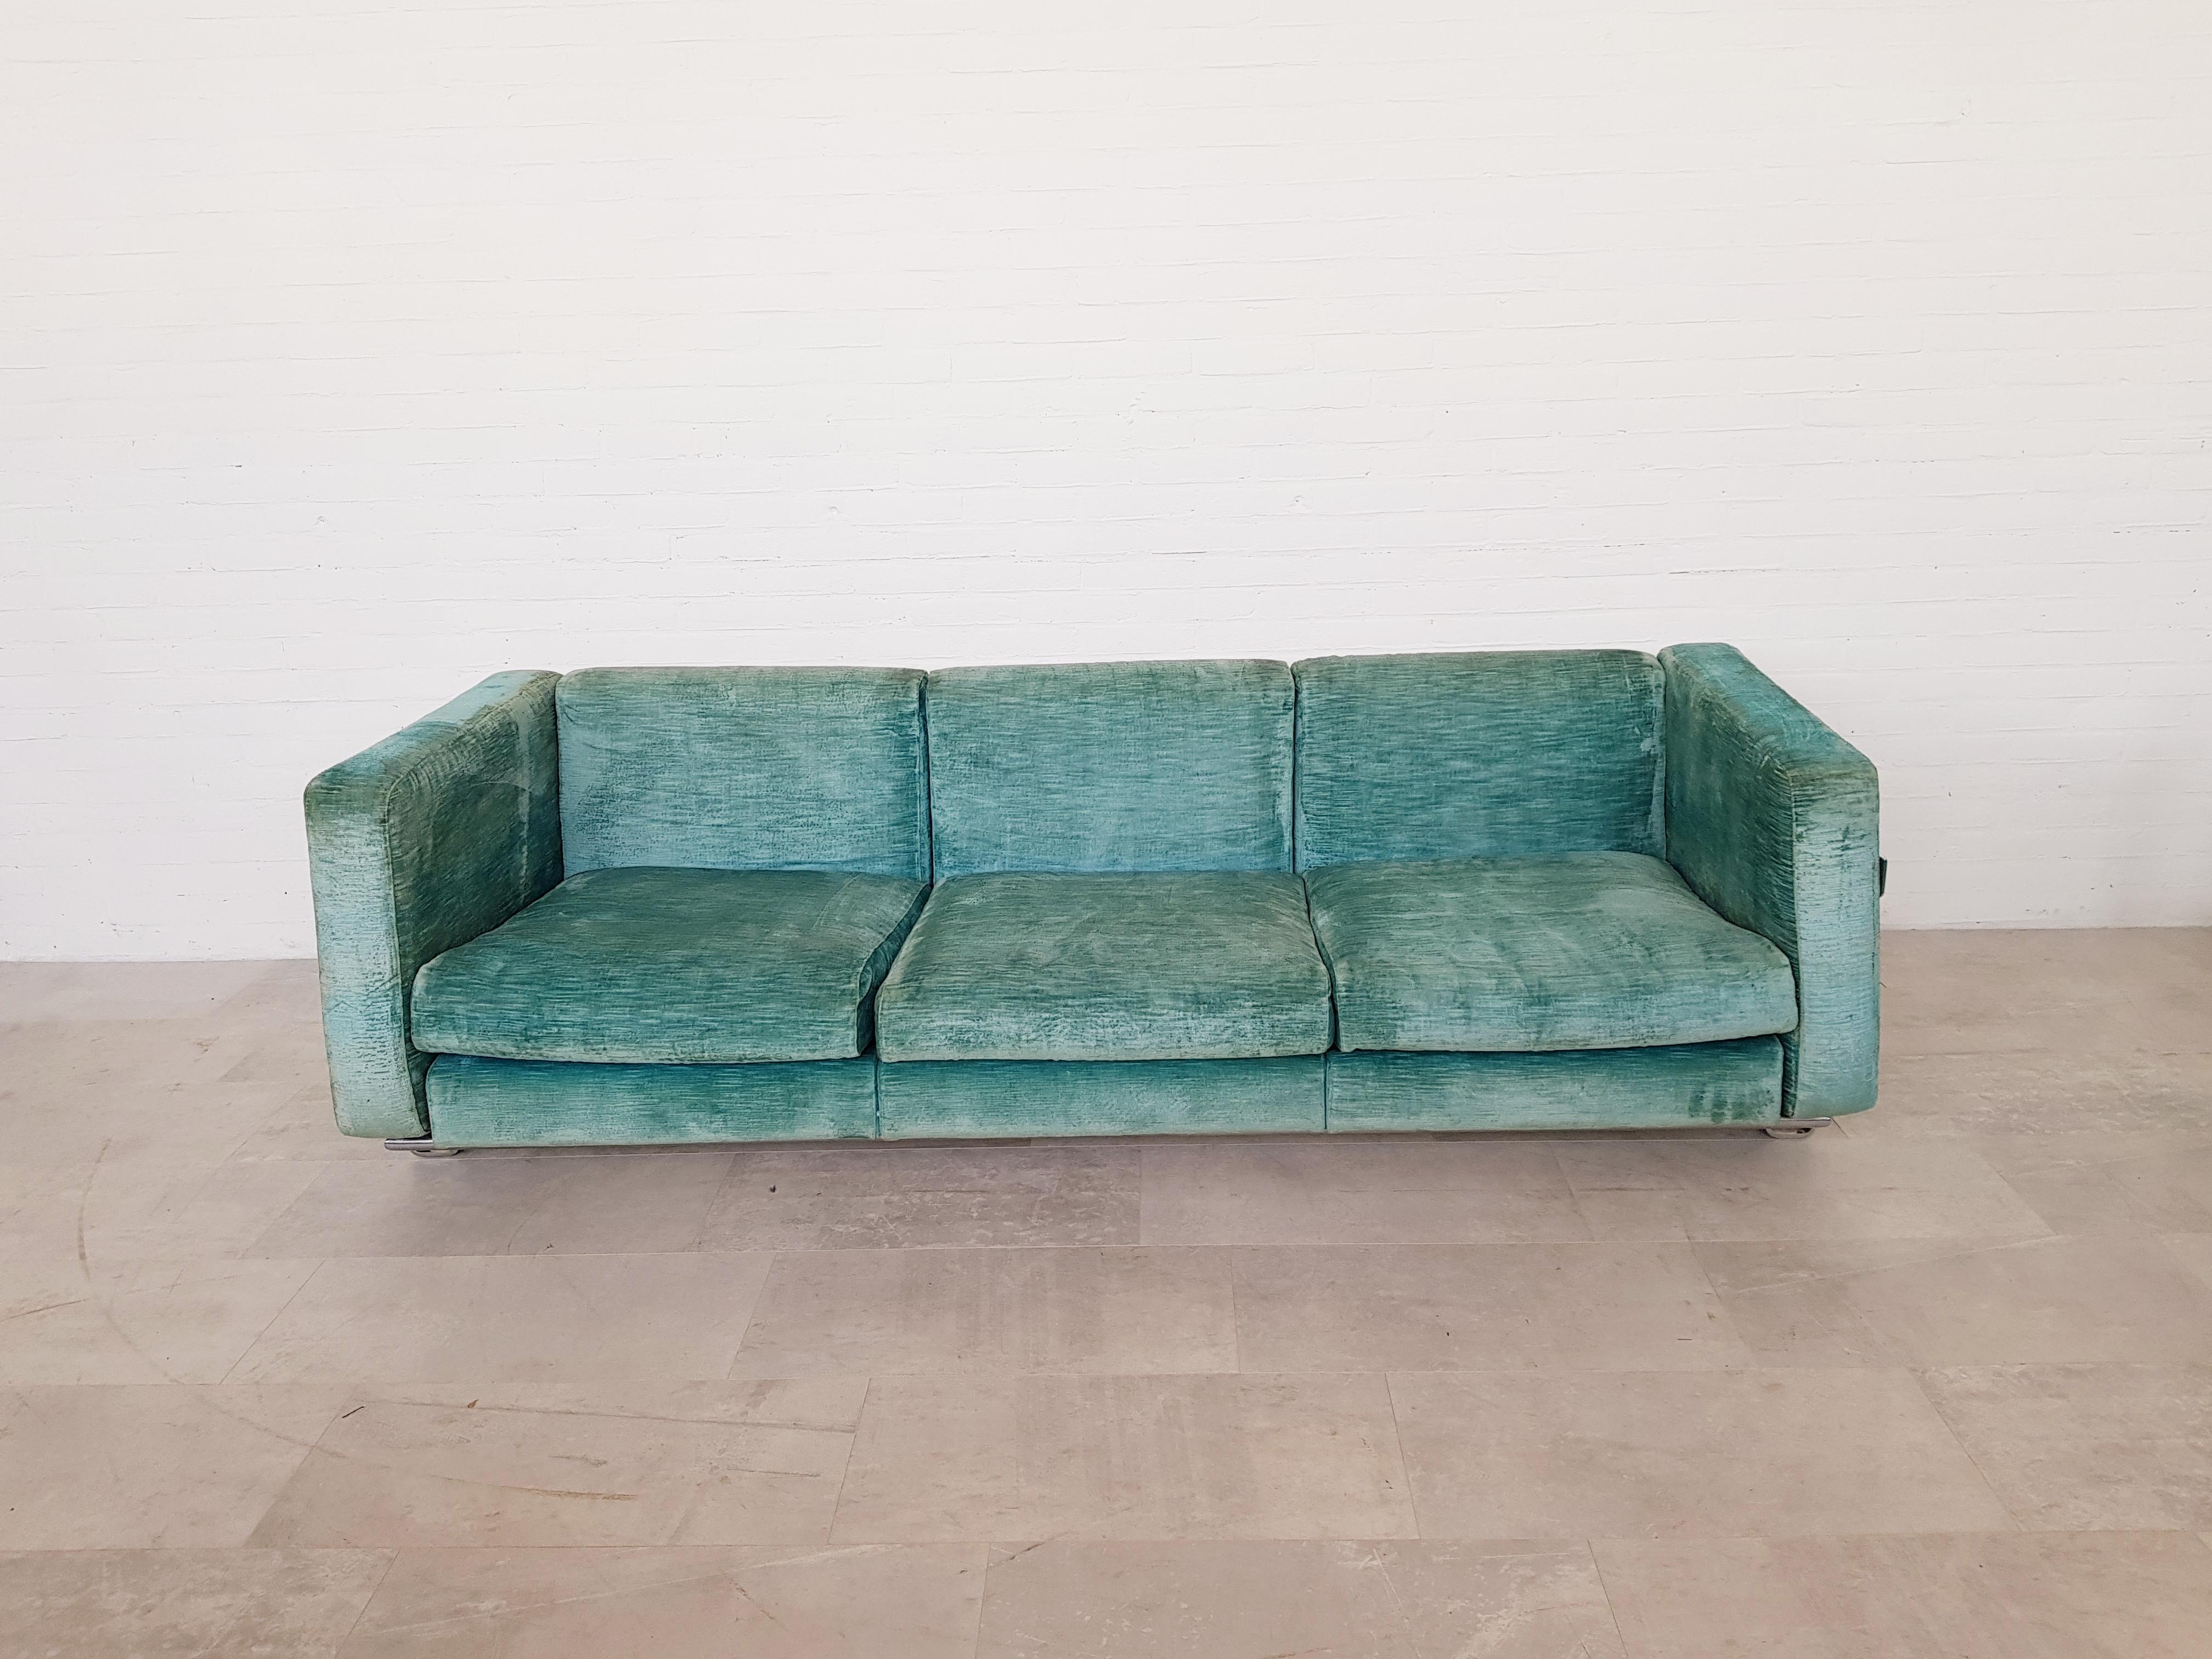 Turquoise vintage sofa by Luigi Caccia Dominioni for Azucena, Italy, 1970s.

Stunning wear on the turquoise fabric which I personally adore, very studio Dimore.
Worn fabric on a perfect condition chromed steel frame

Postmodern three-seat
We